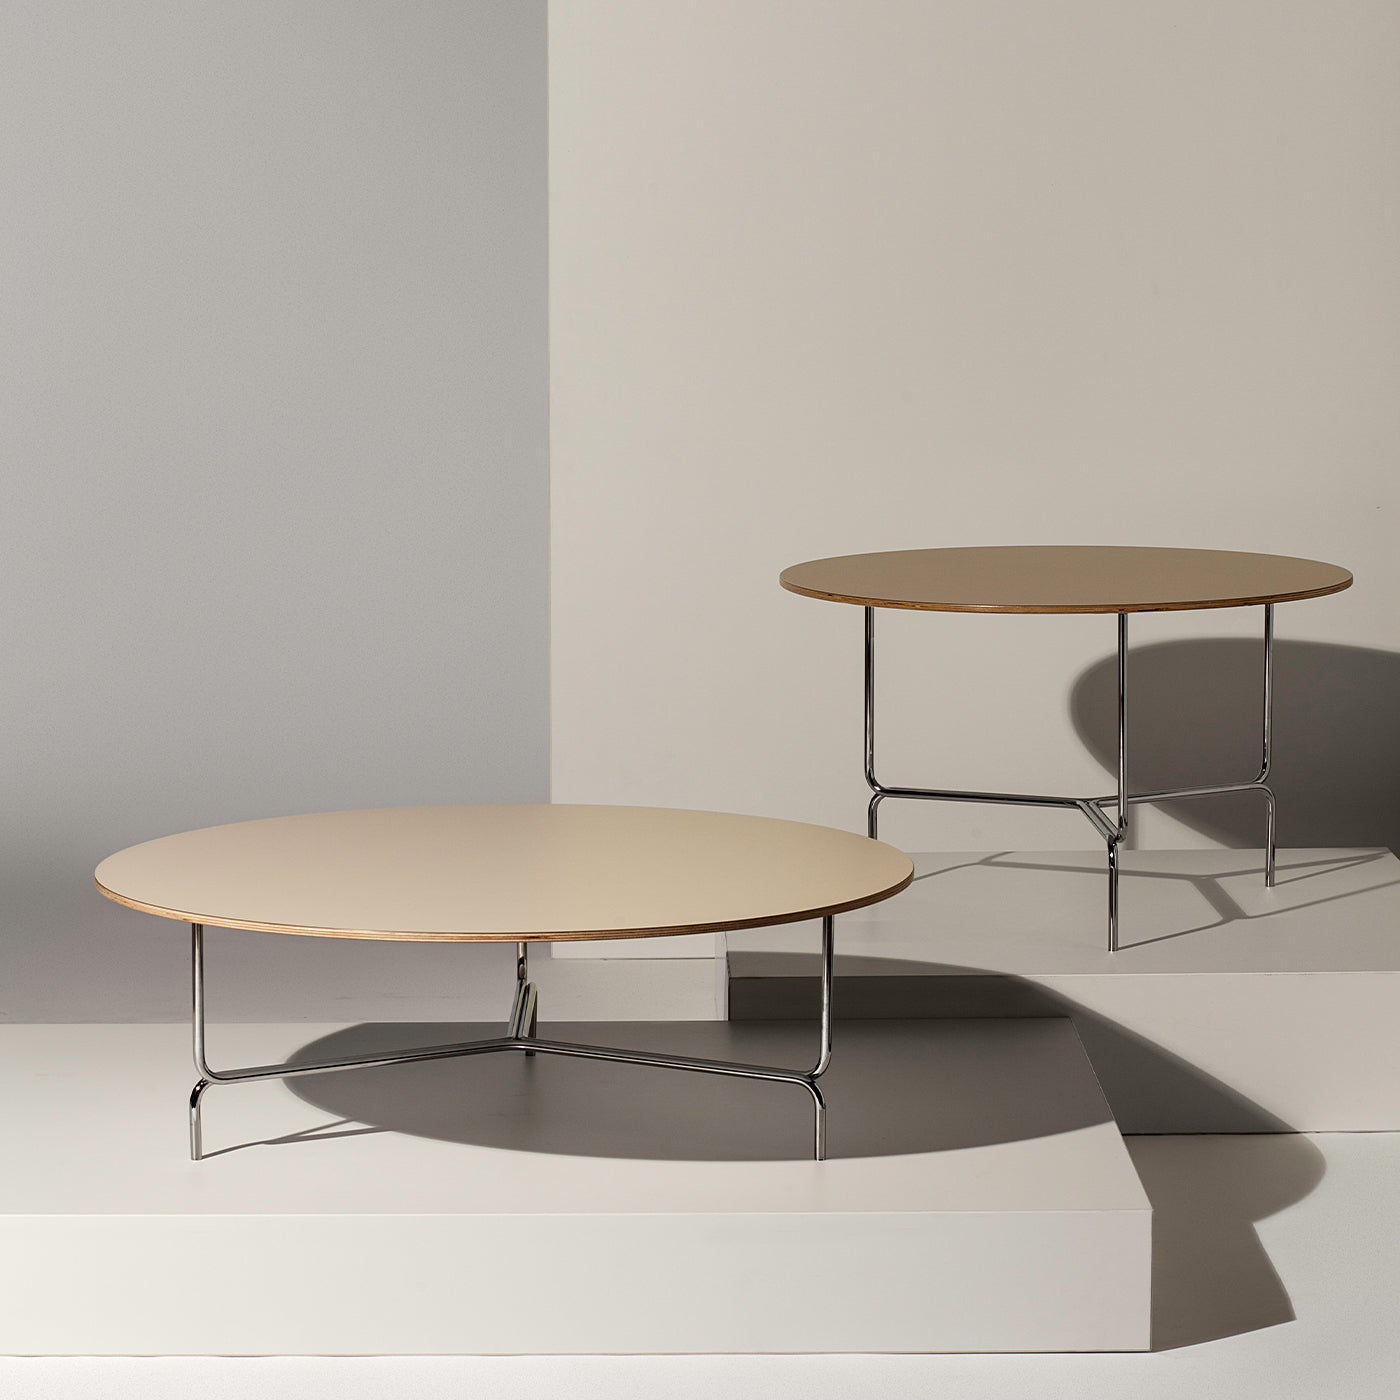 Litta Beige Low Coffee Table by R. Mangiarotti and I. Suppanen - Alternative view 1